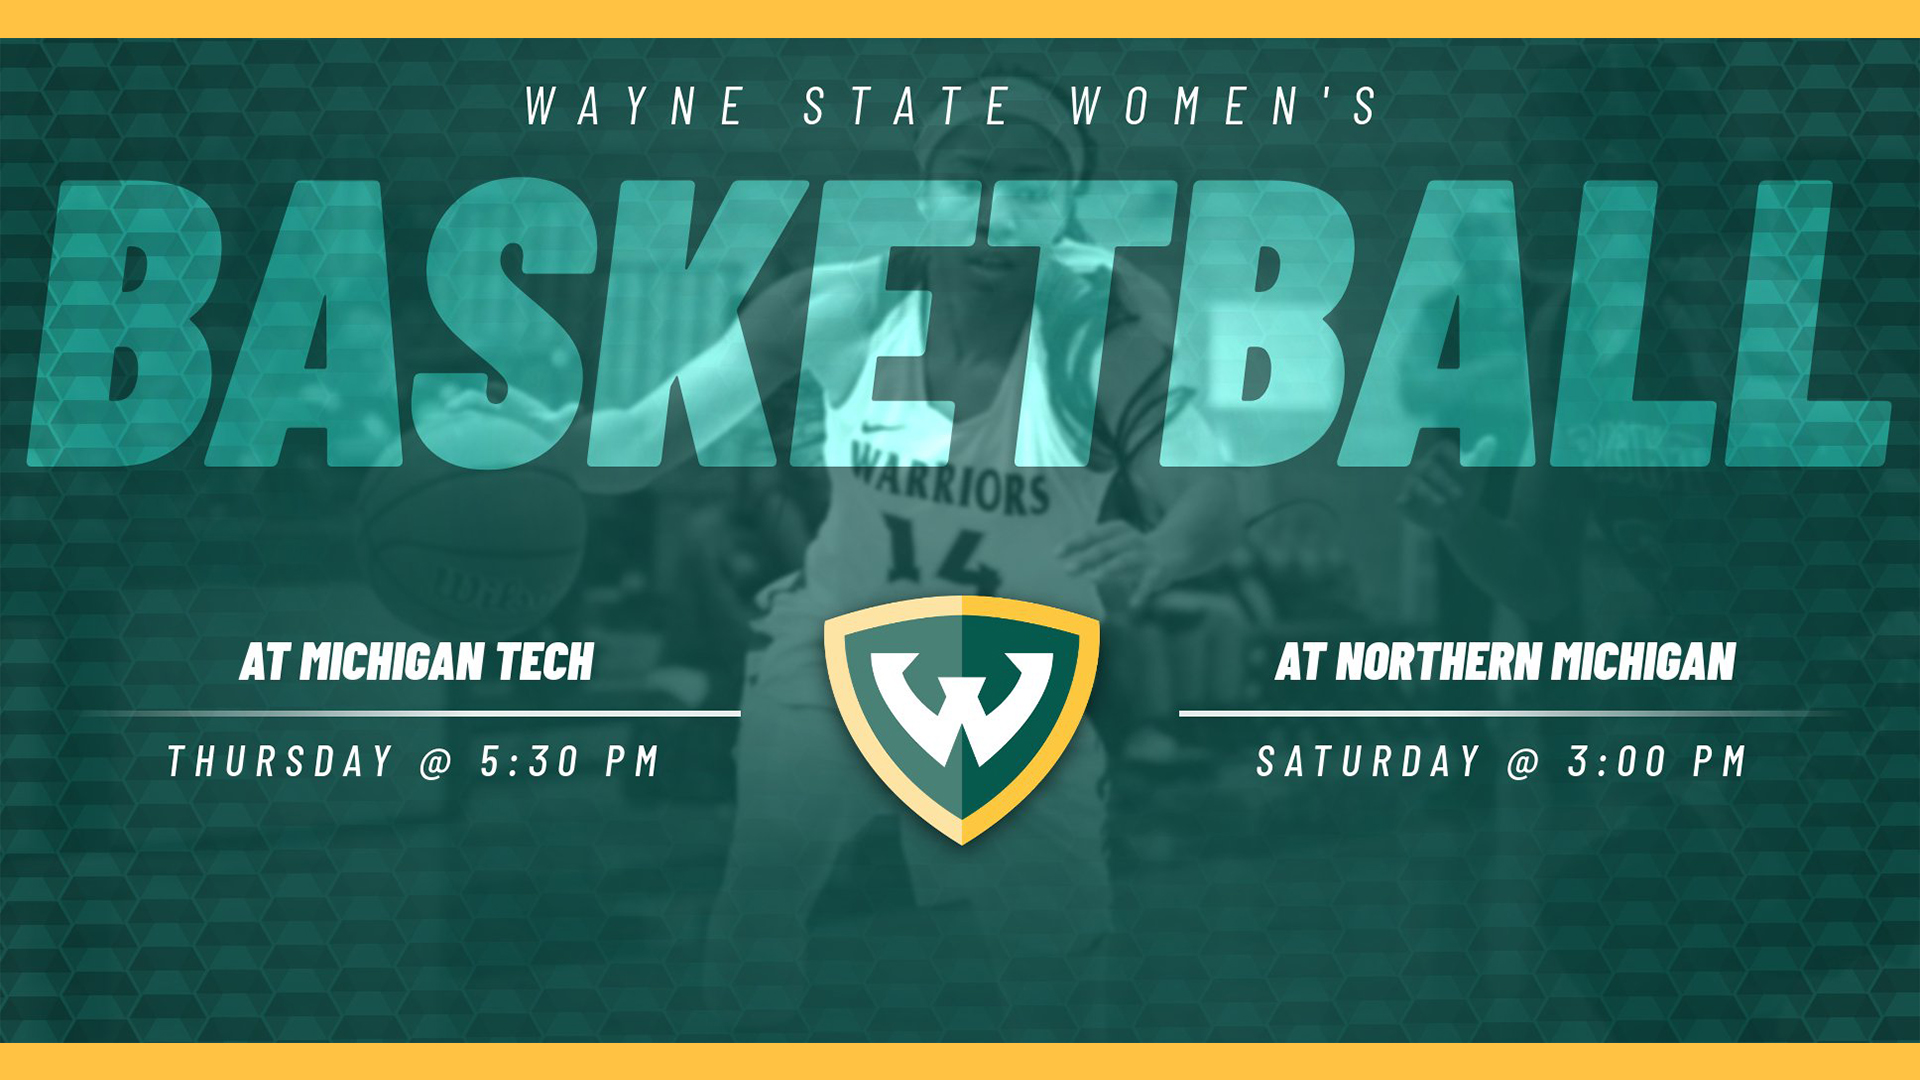 Women S Basketball Travels To U P For First Games Of Wayne